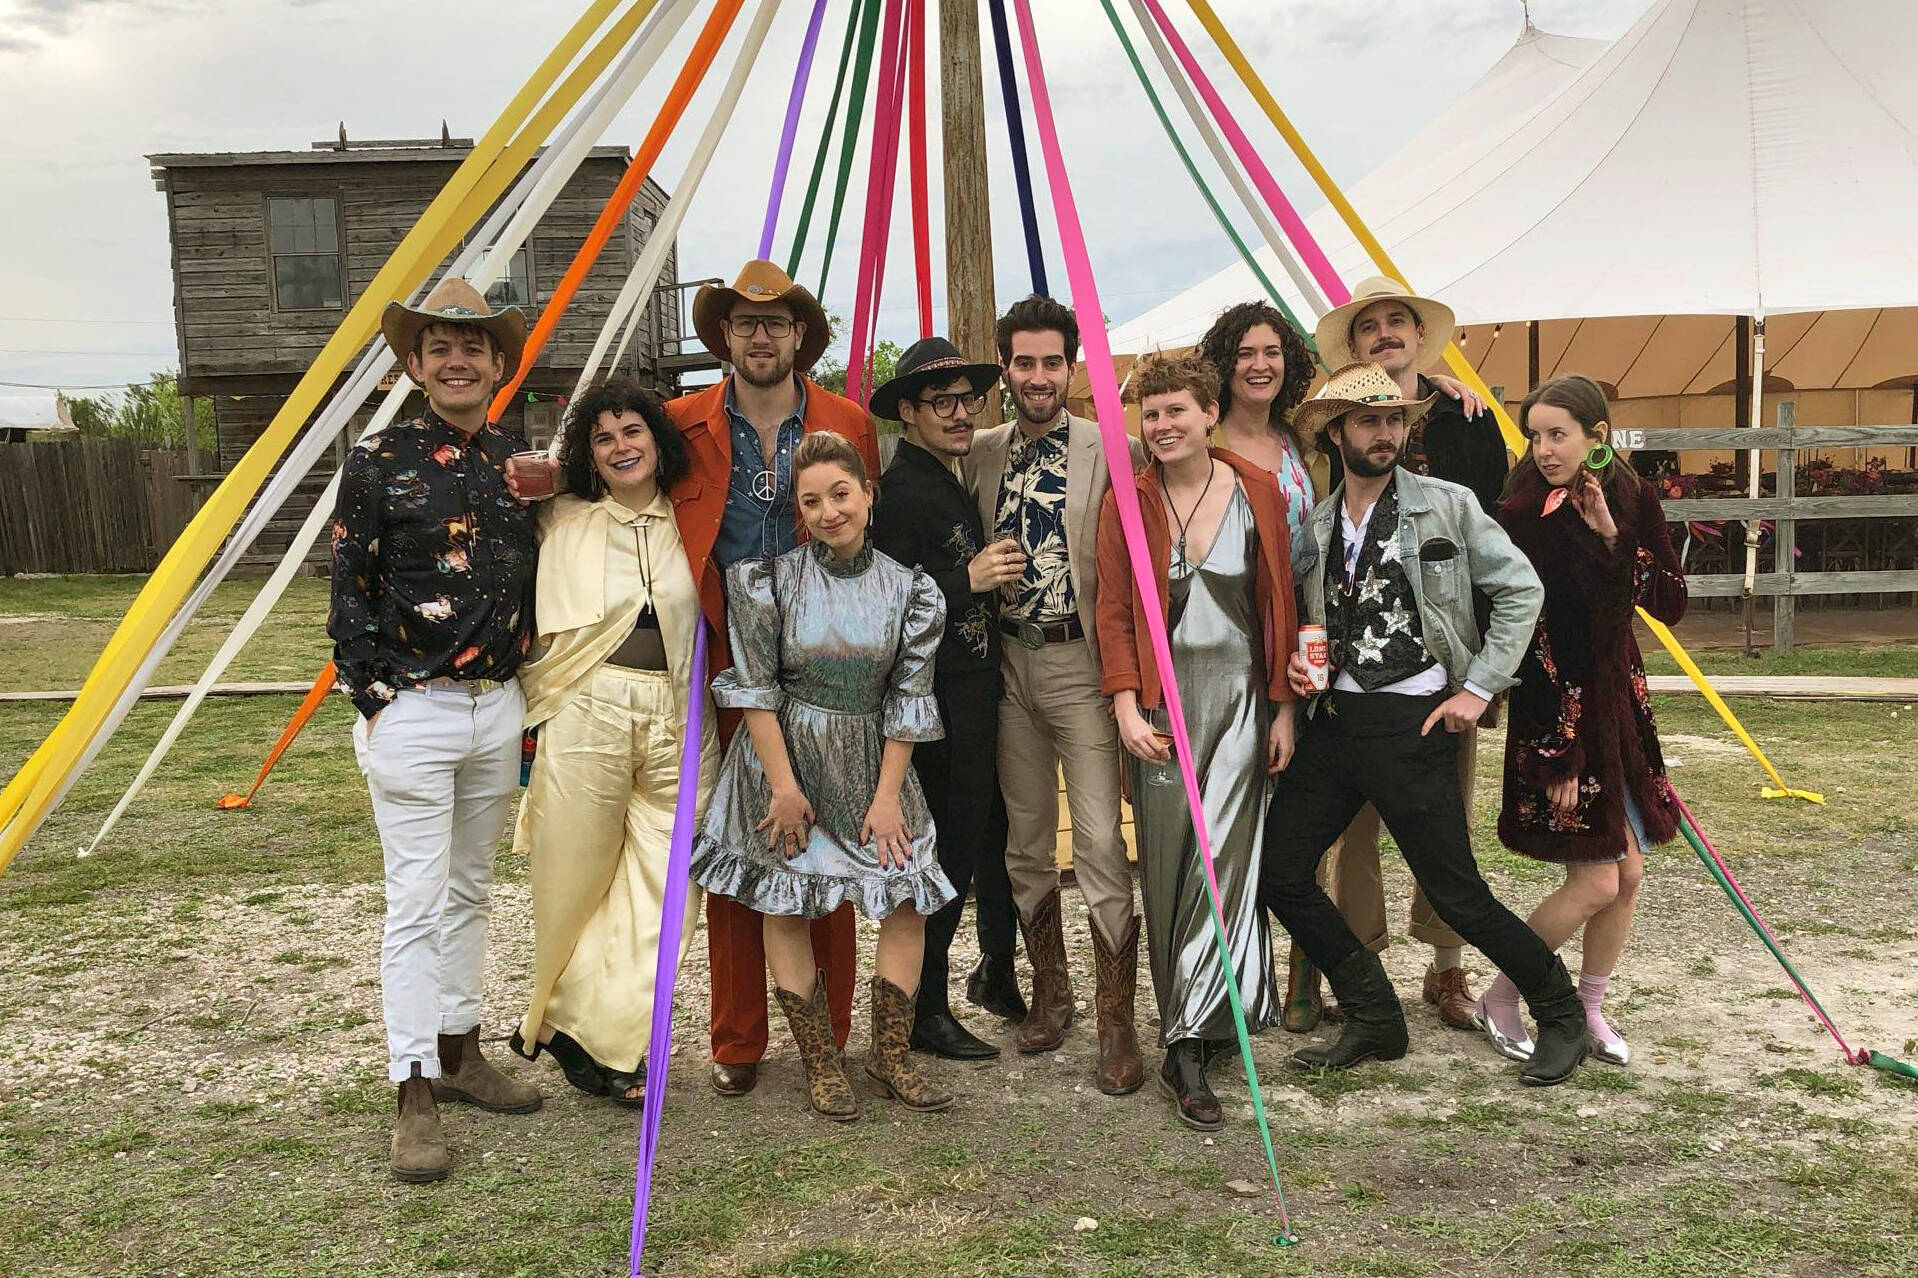 Wedding guests who adhered to the dress code of “Space Disco Cowboy,” pose at a wedding in Austin, Texas on March 30, 2019. More than ever, wedding guests are contending with nontraditional dress code requests. (Rikki Gotthelf via AP)